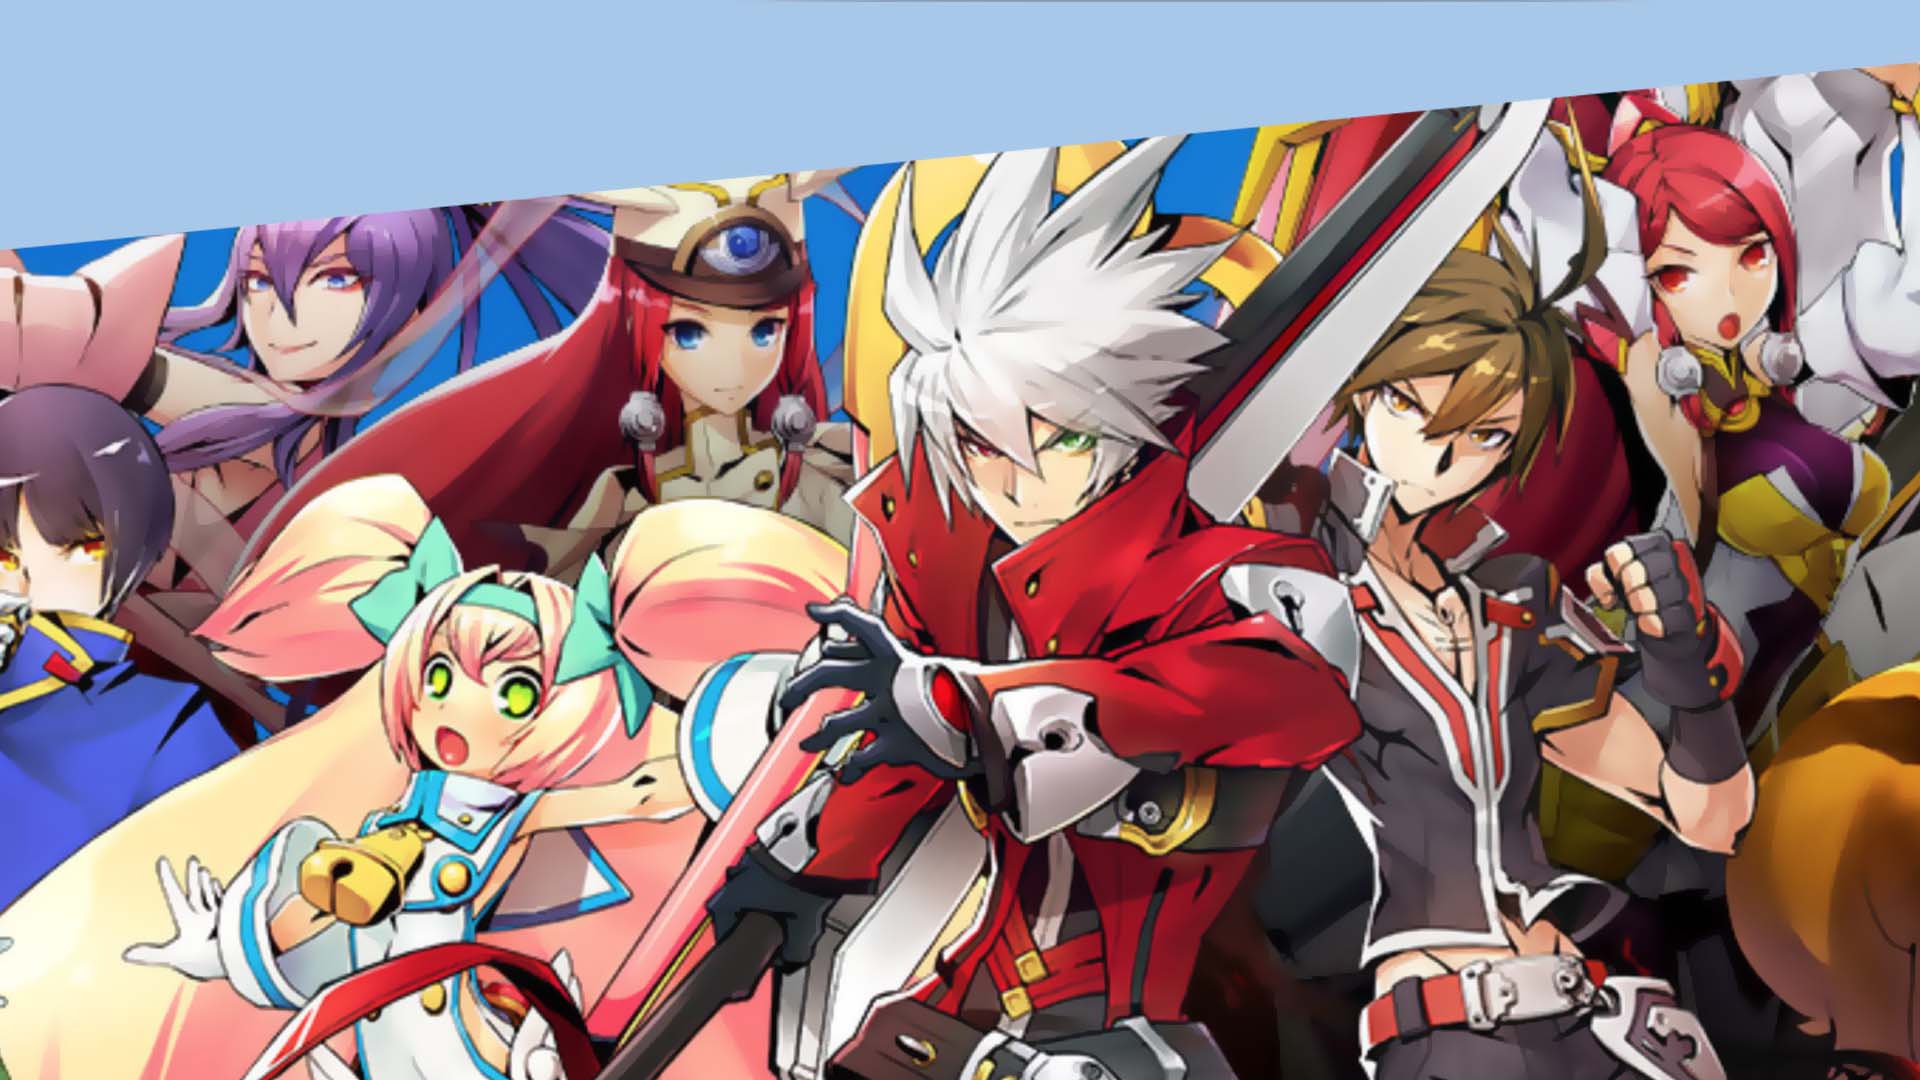 blazblue cross tag battle shows off the cast in its opening cutscene nintendo wire blazblue cross tag battle shows off